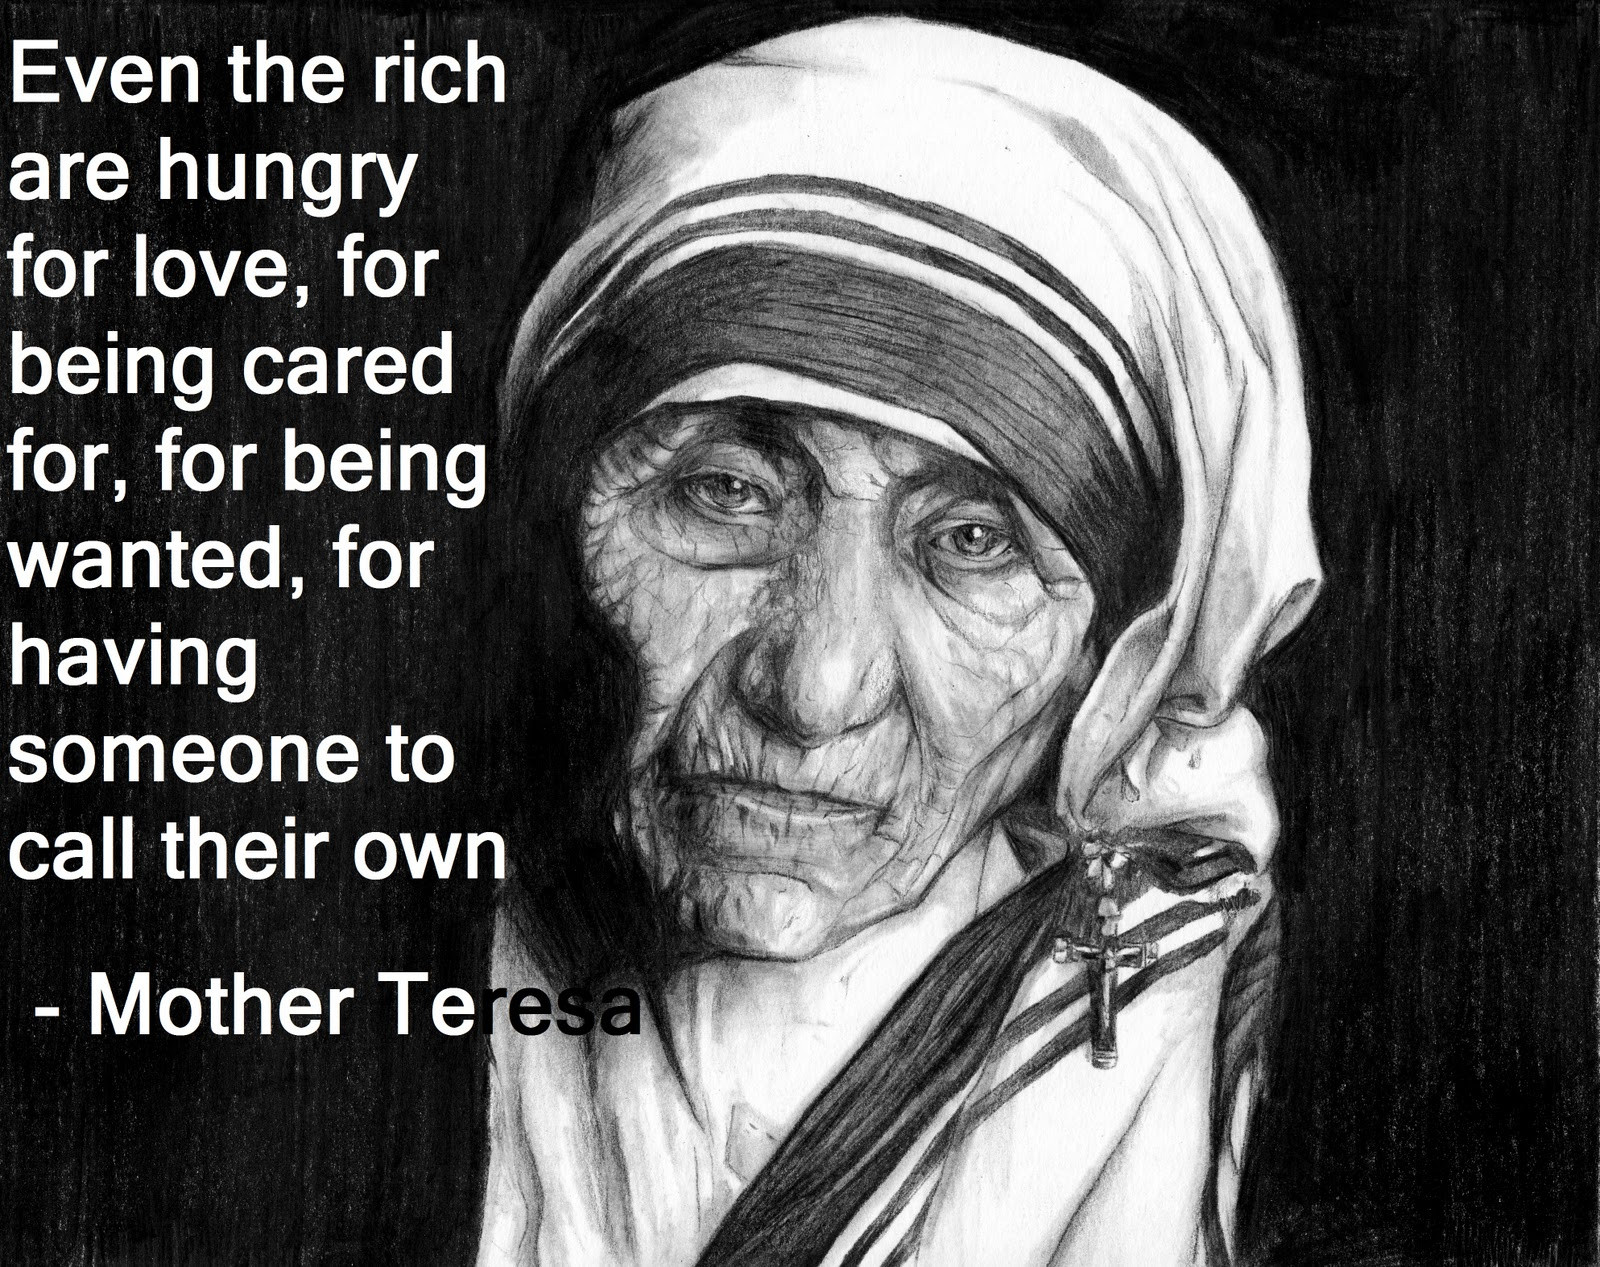 Mother Teresa Quotes Images
 MOTHER TERESA OF CALCUTTA